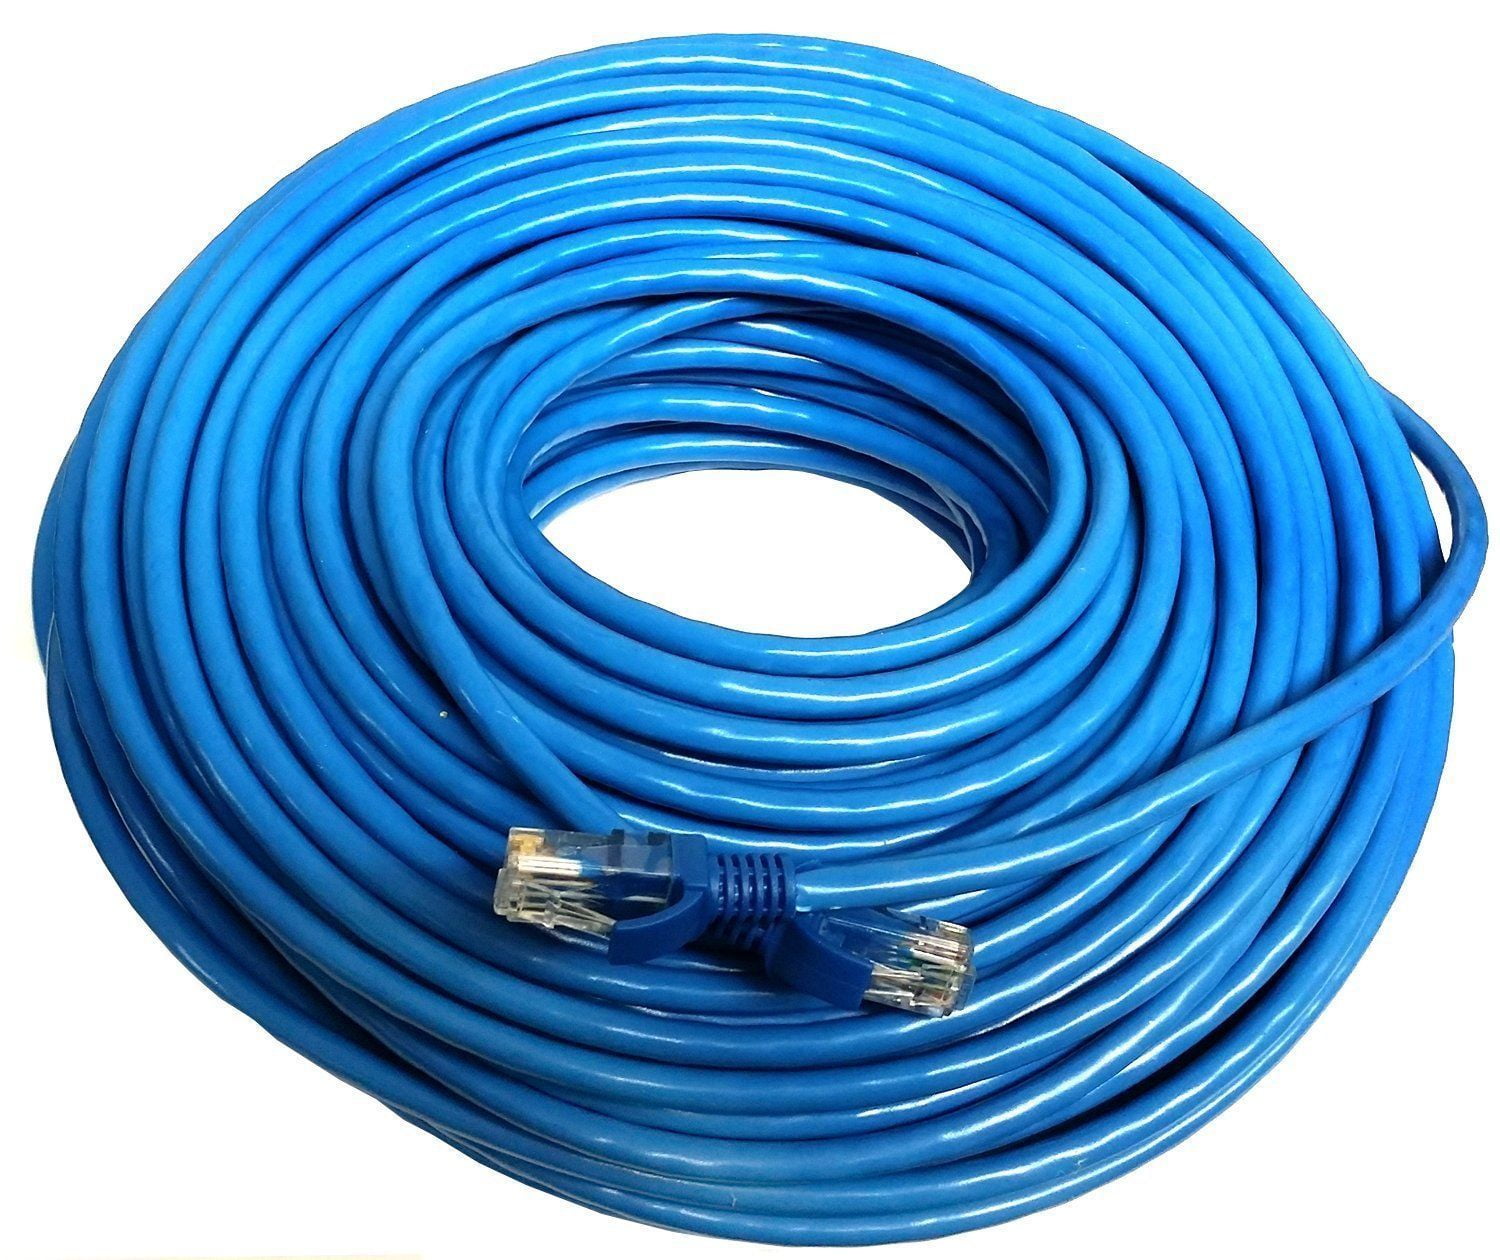 Cablevantage RJ45 Cat6 75 Feet Ethernet LAN Network Cable for PS Xbox PC  Internet Router Blue